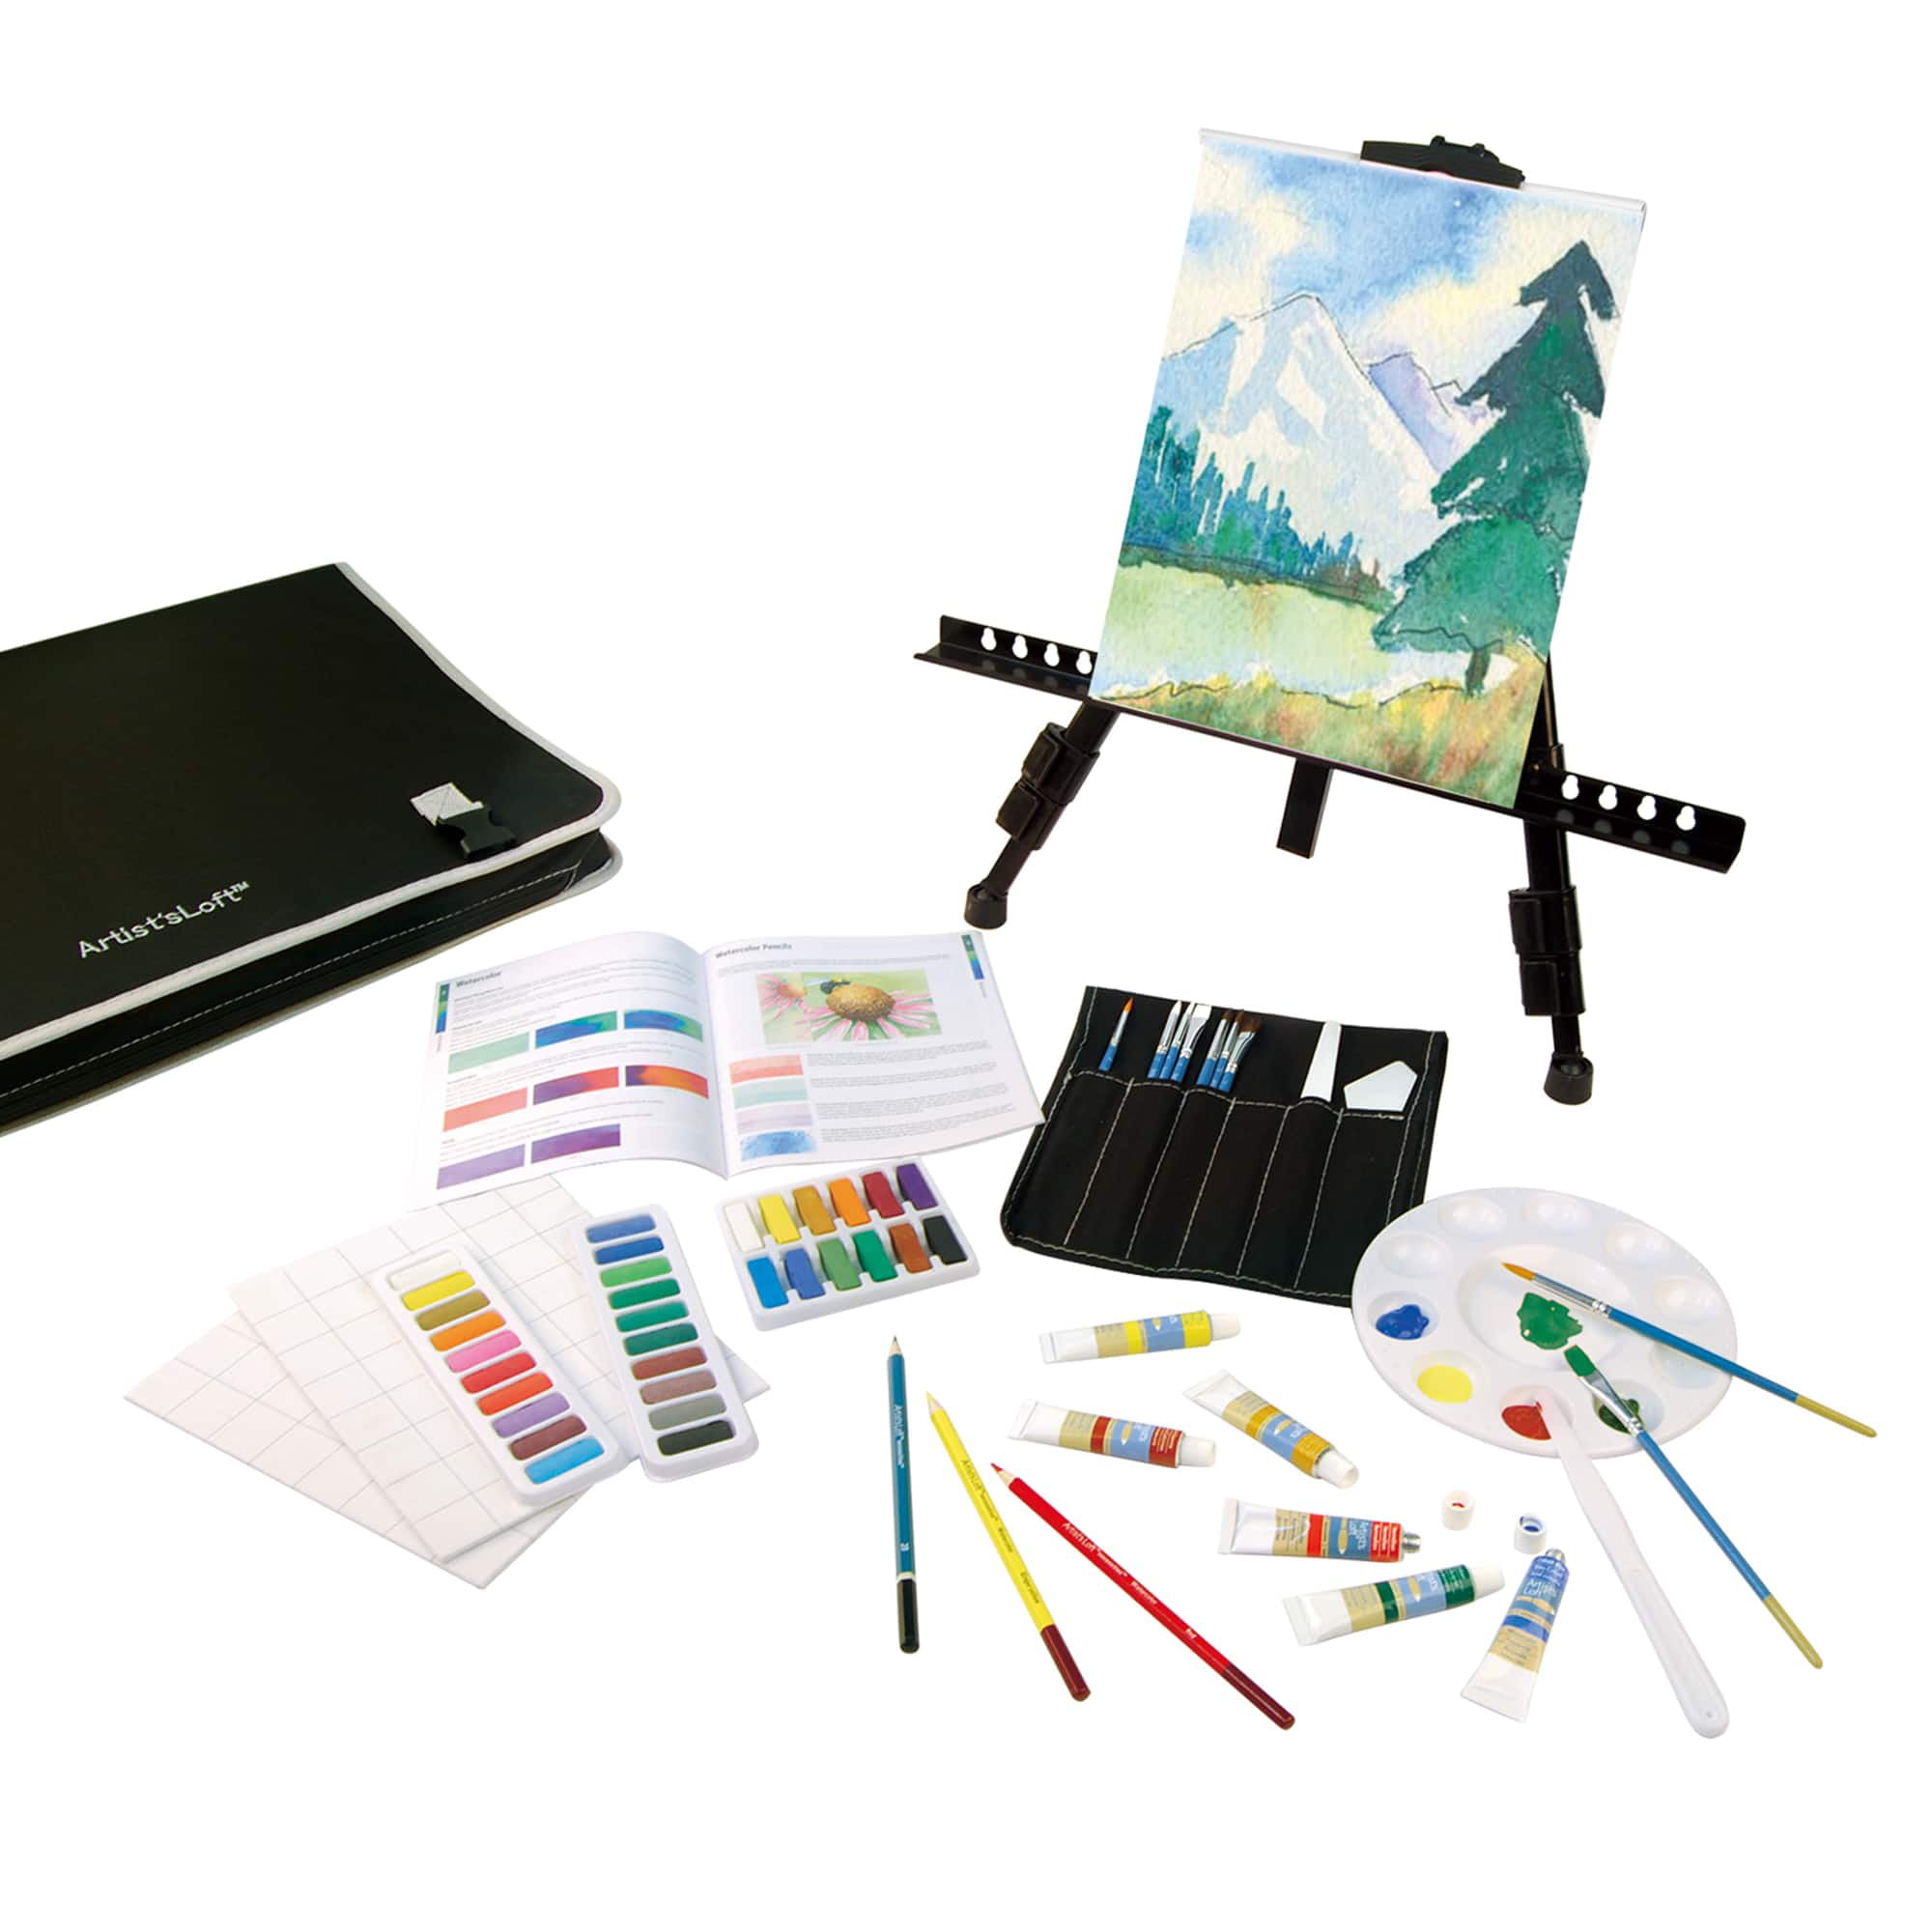 ArtSkills 165 Piece Premier Artist Set, Master Edition with Collapsible  Easel - Sam's Club